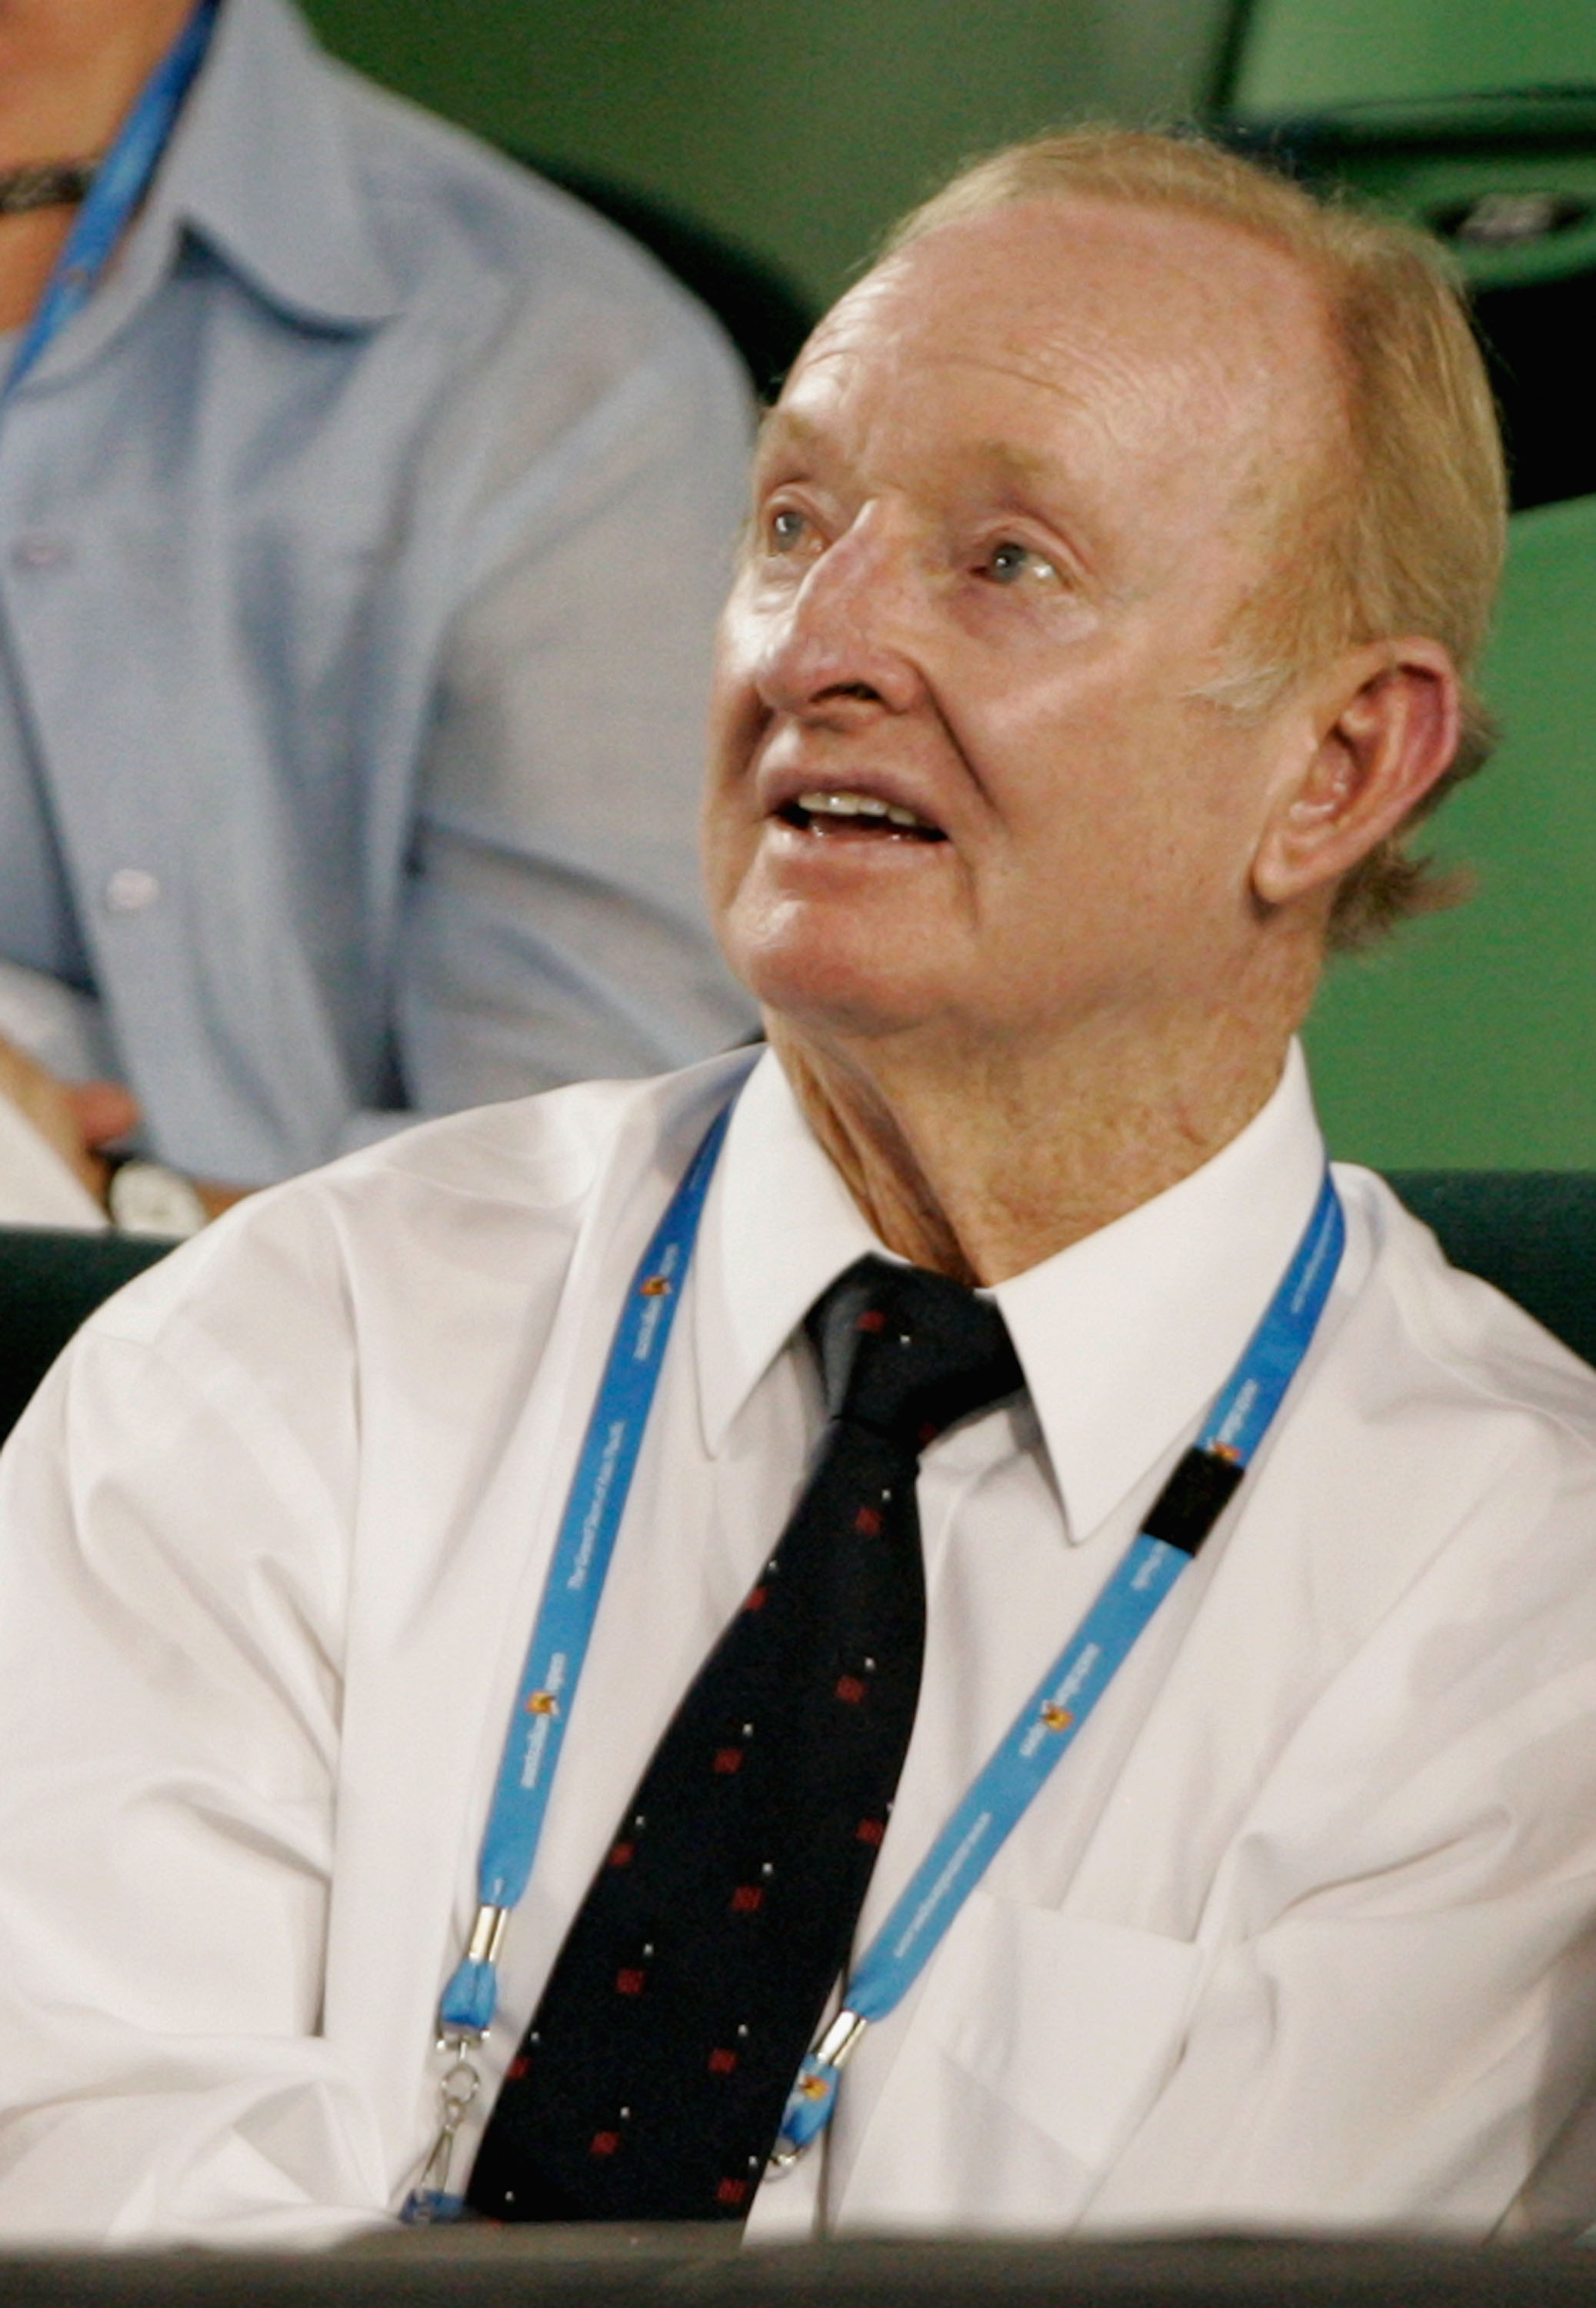 MELBOURNE, AUSTRALIA - JANUARY 28:  Australian tennis legend Rod Laver watches the quarterfinal match between Svetlana Kuznetsova of Russia and Serena Williams of the United States of America during day ten of the 2009 Australian Open at Melbourne Park on